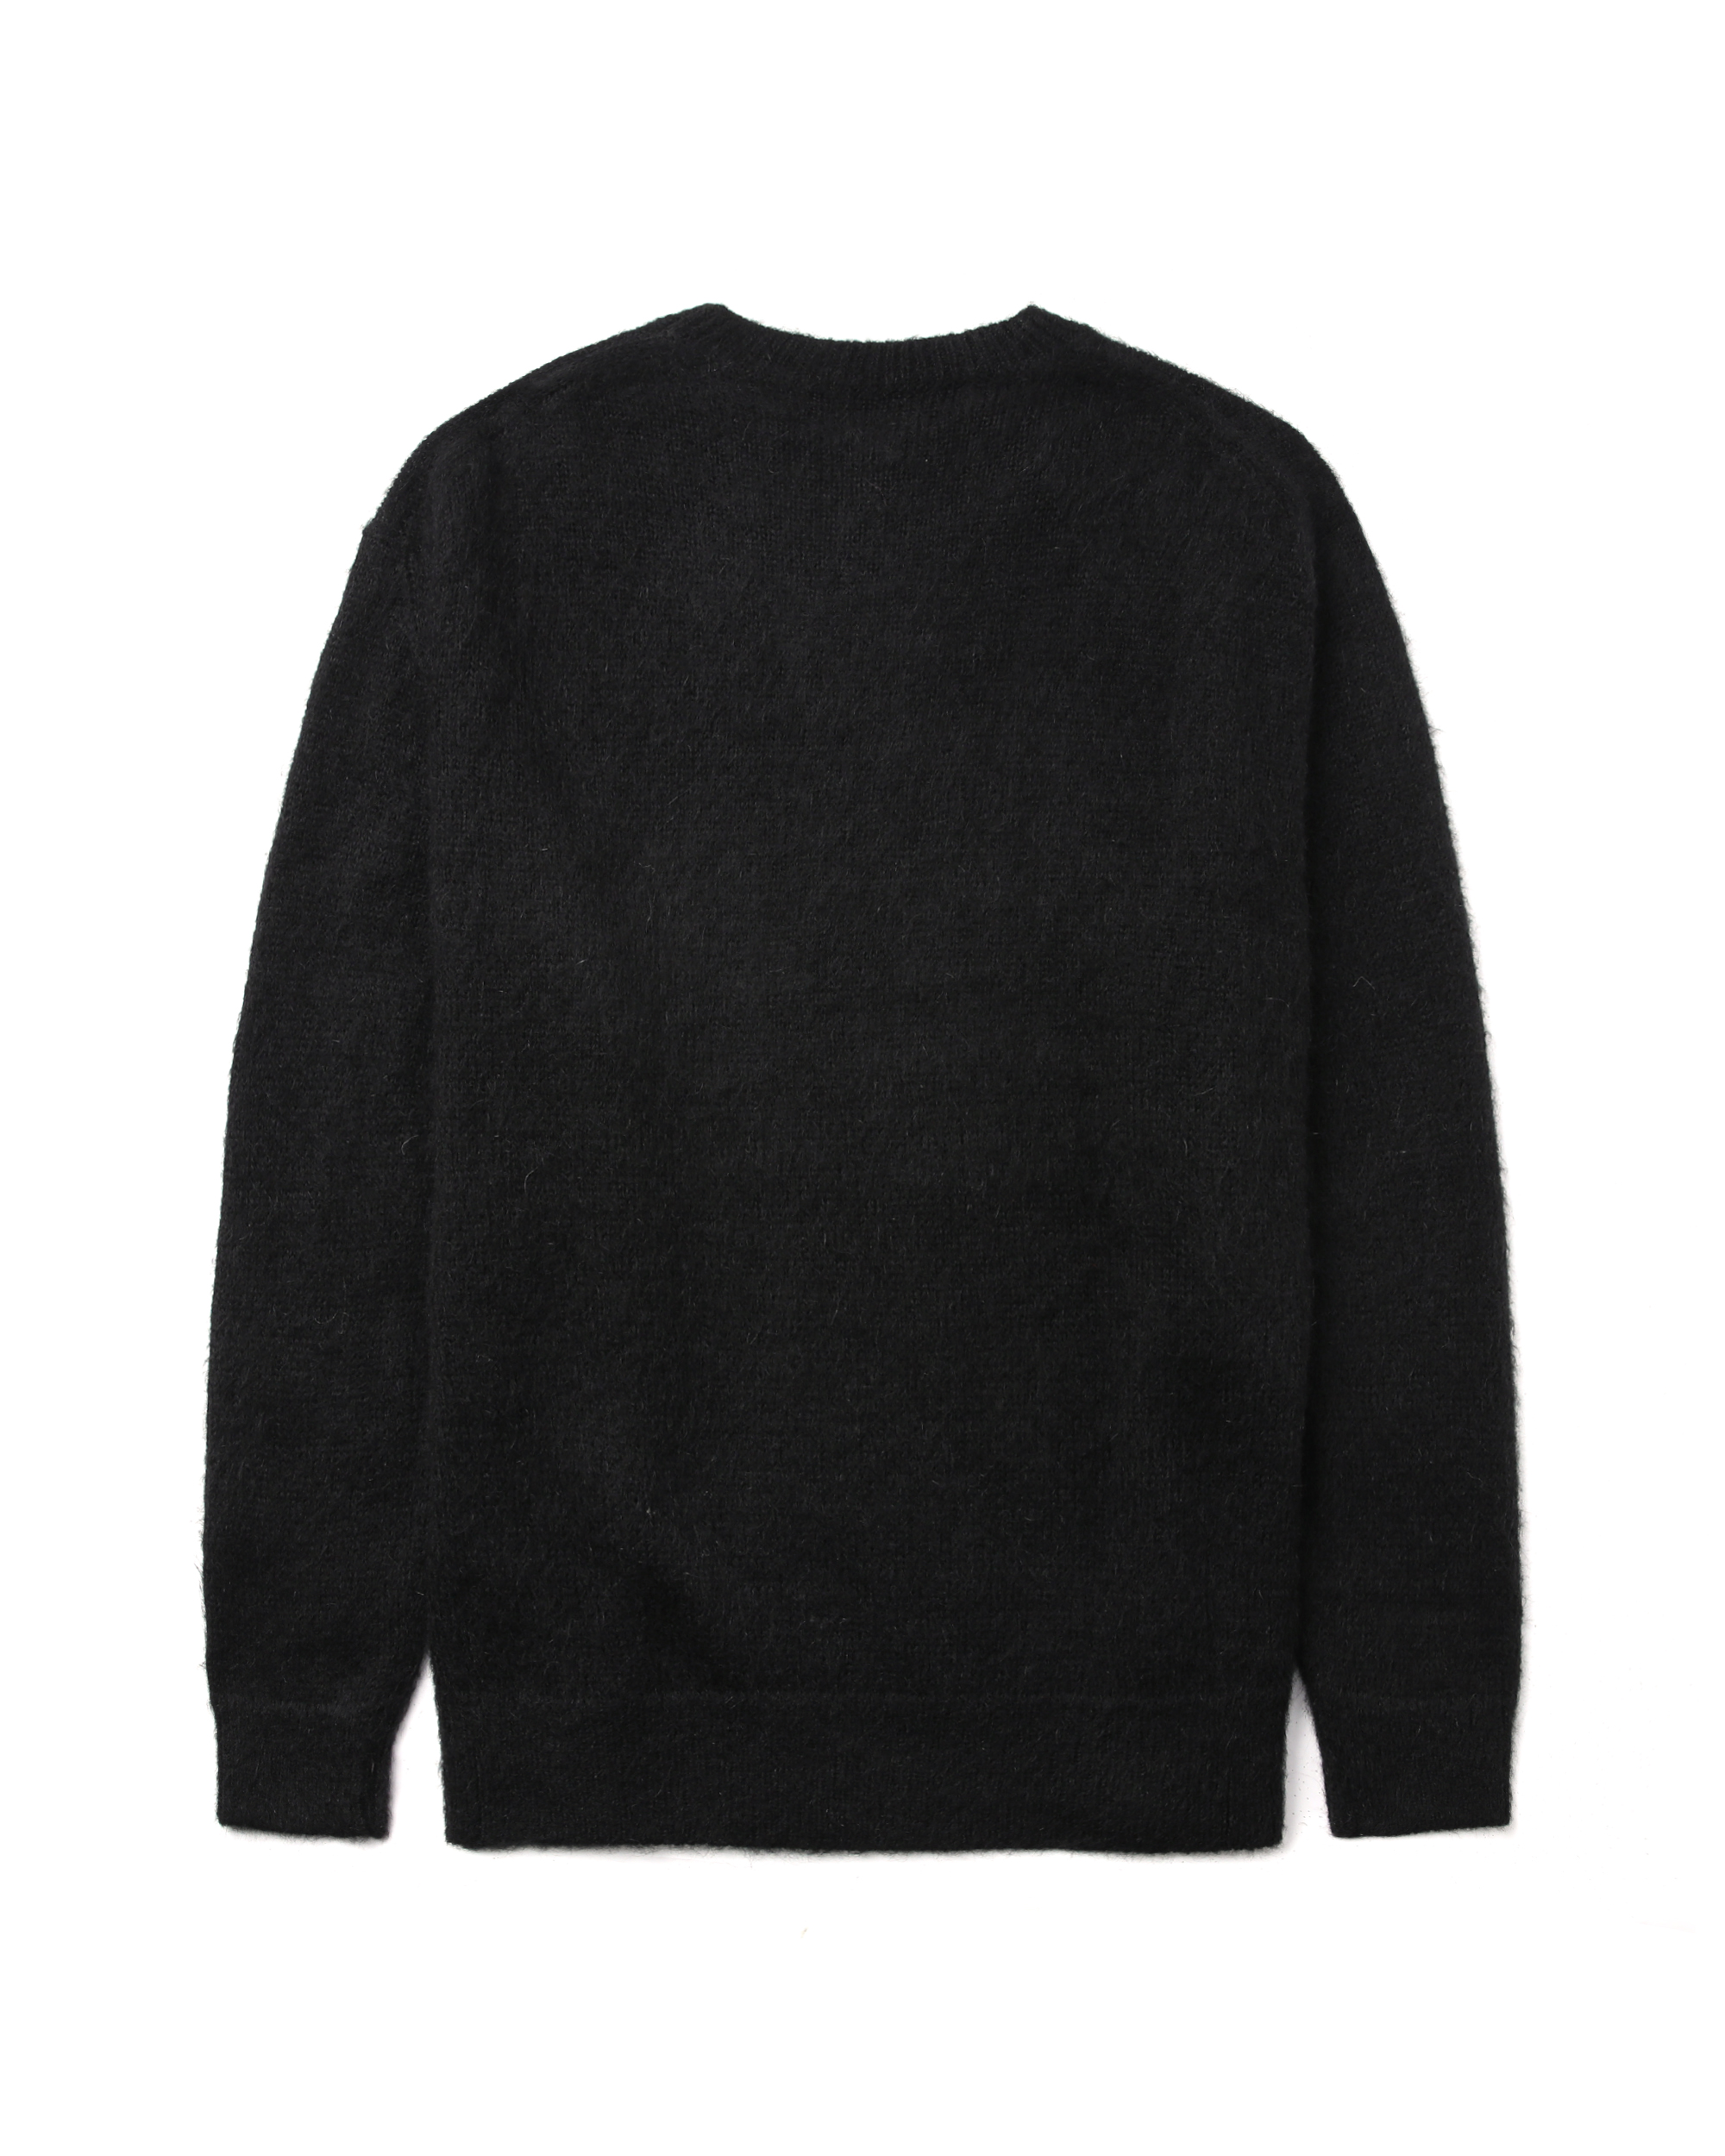 Project(R) Logo Knit Sweater